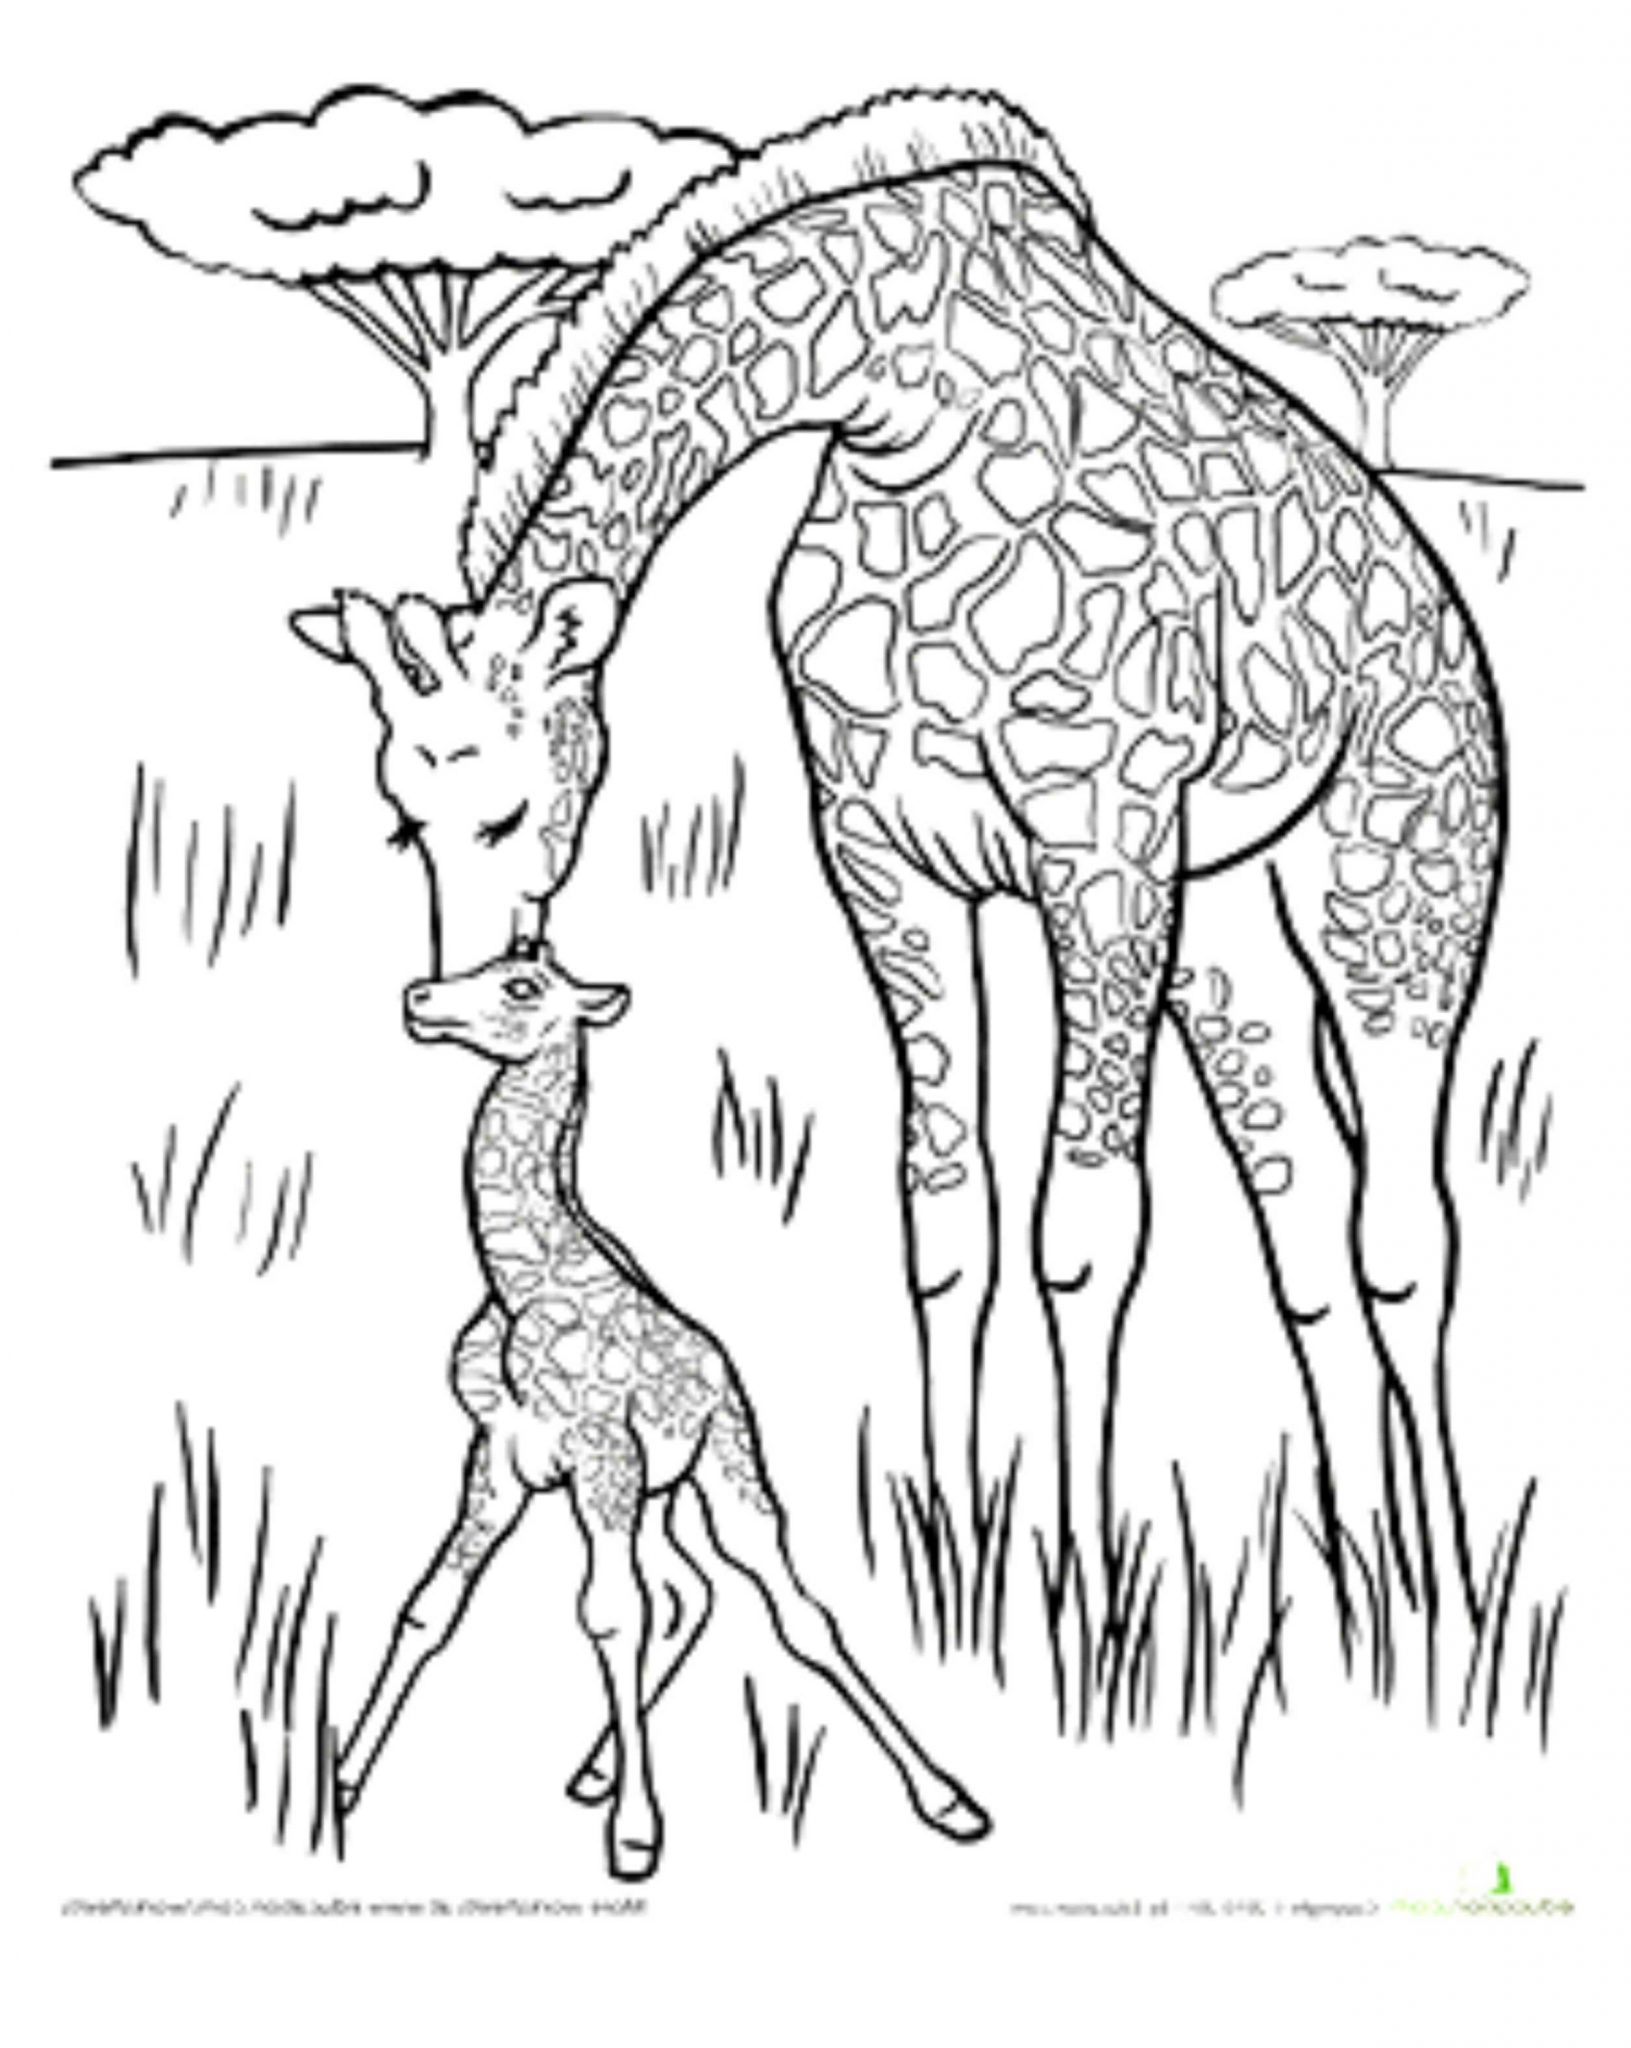 Download Print Download Giraffe Coloring Pages For Kids To Have Fun